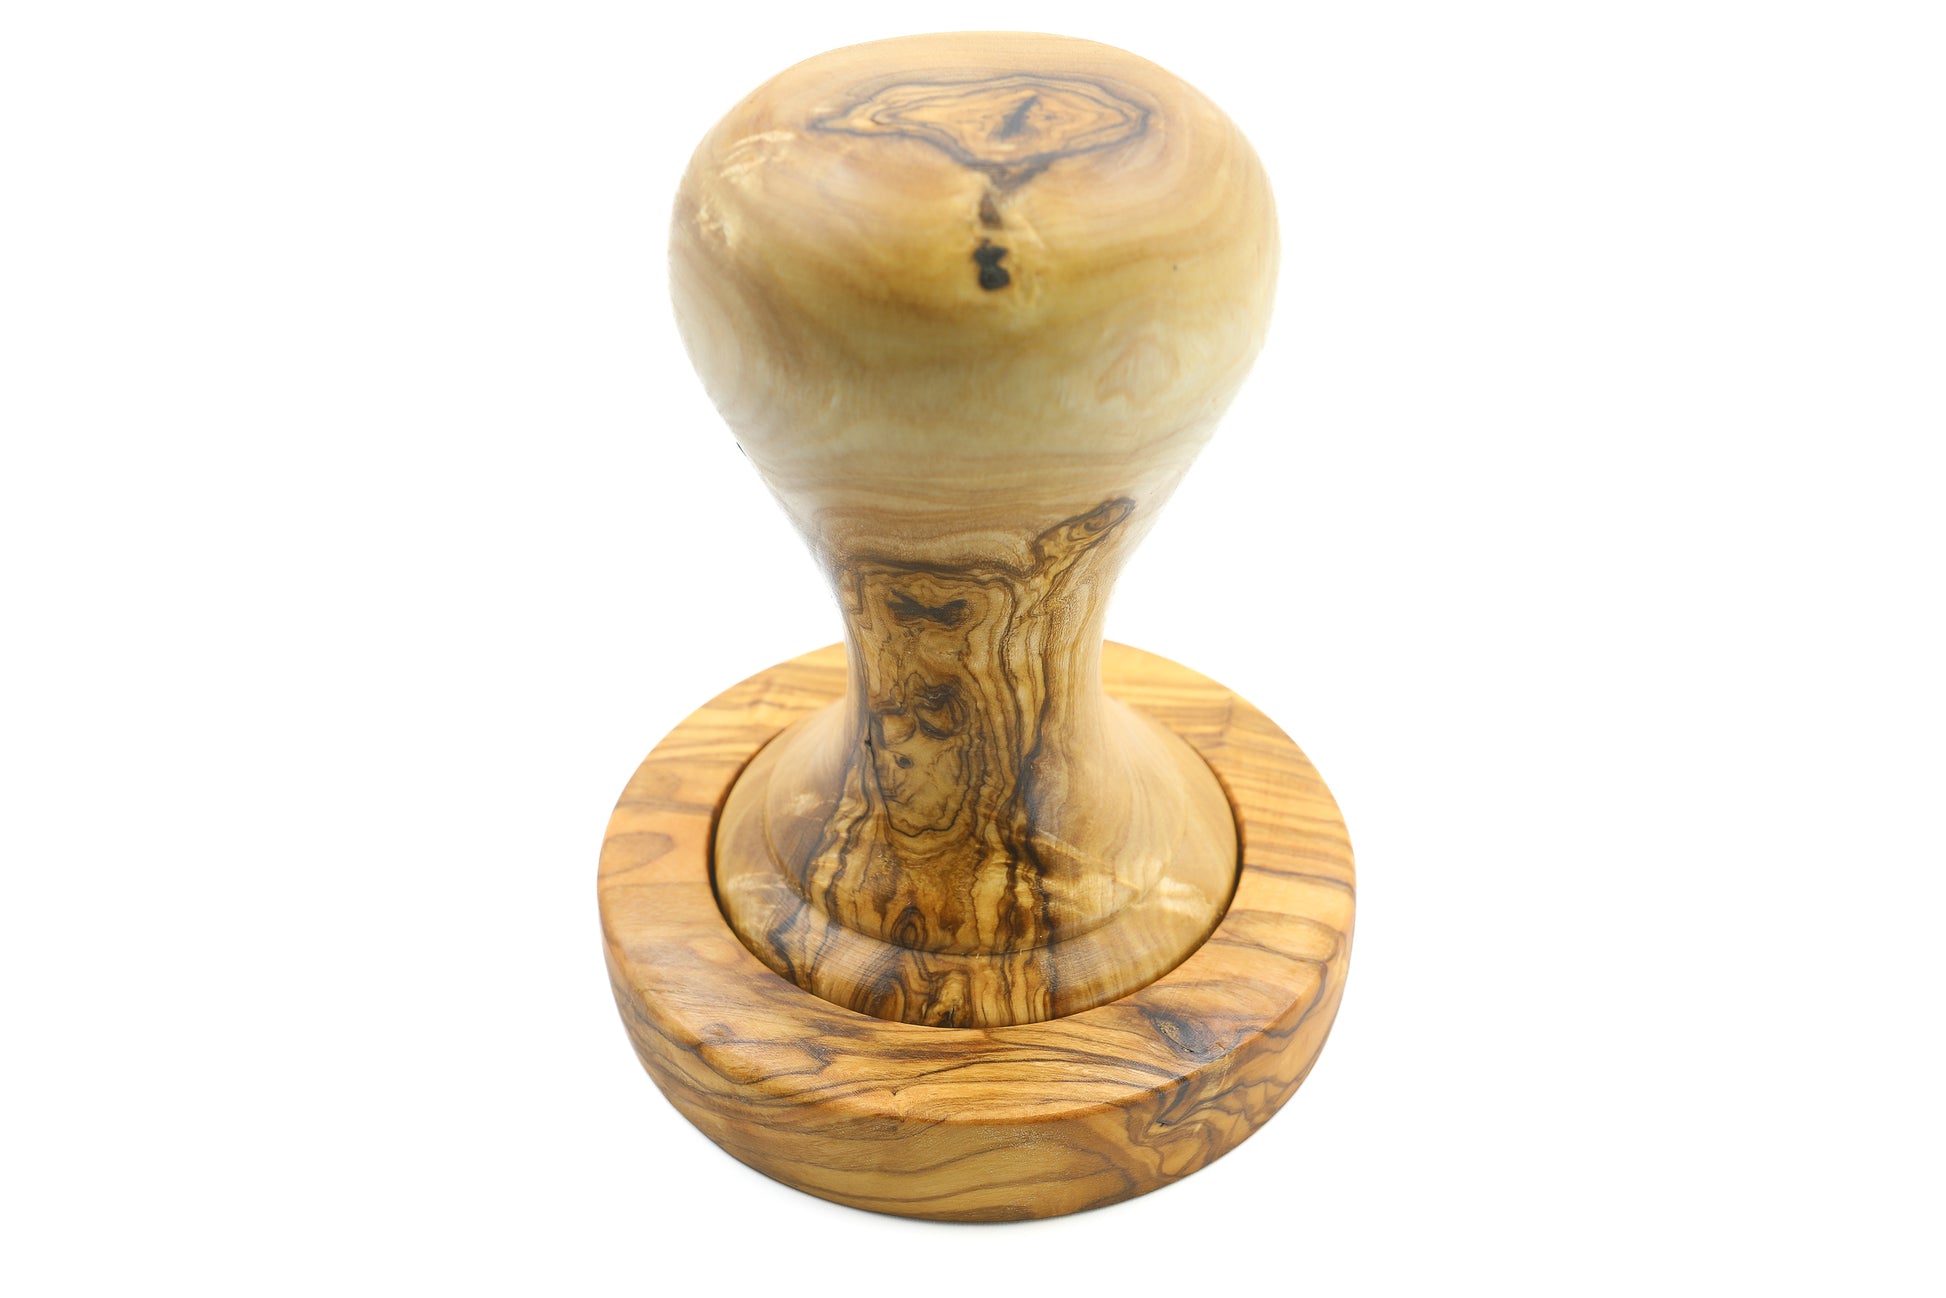 Olive wood coffee tamper with a holder, designed as a unibody espresso presser for your daily brew